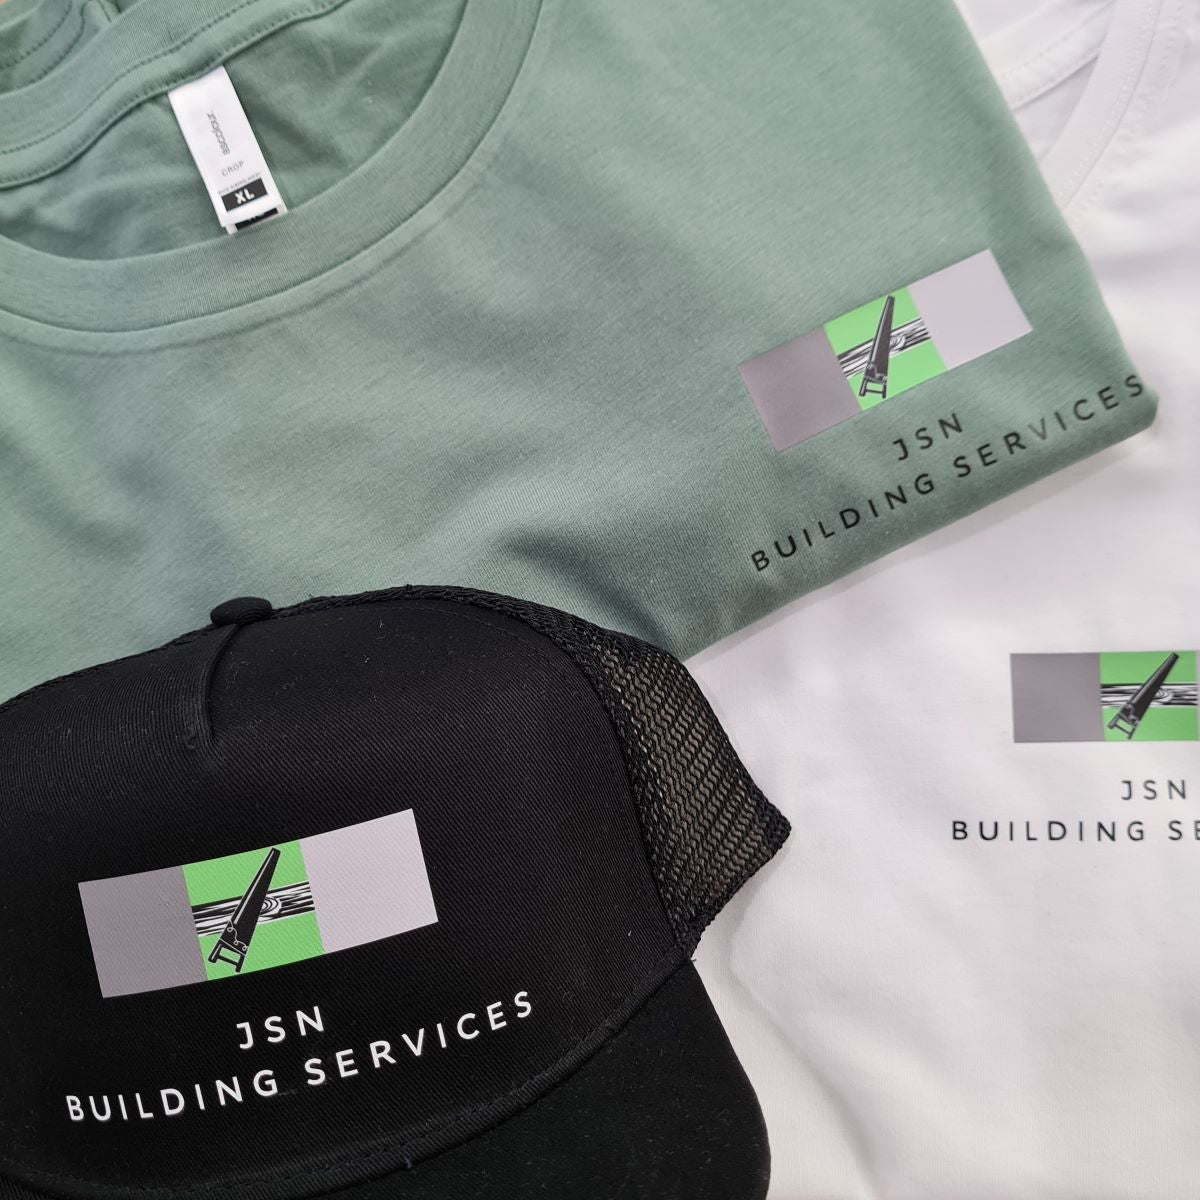 Printed logos on hat and shirts for JSN Building Services